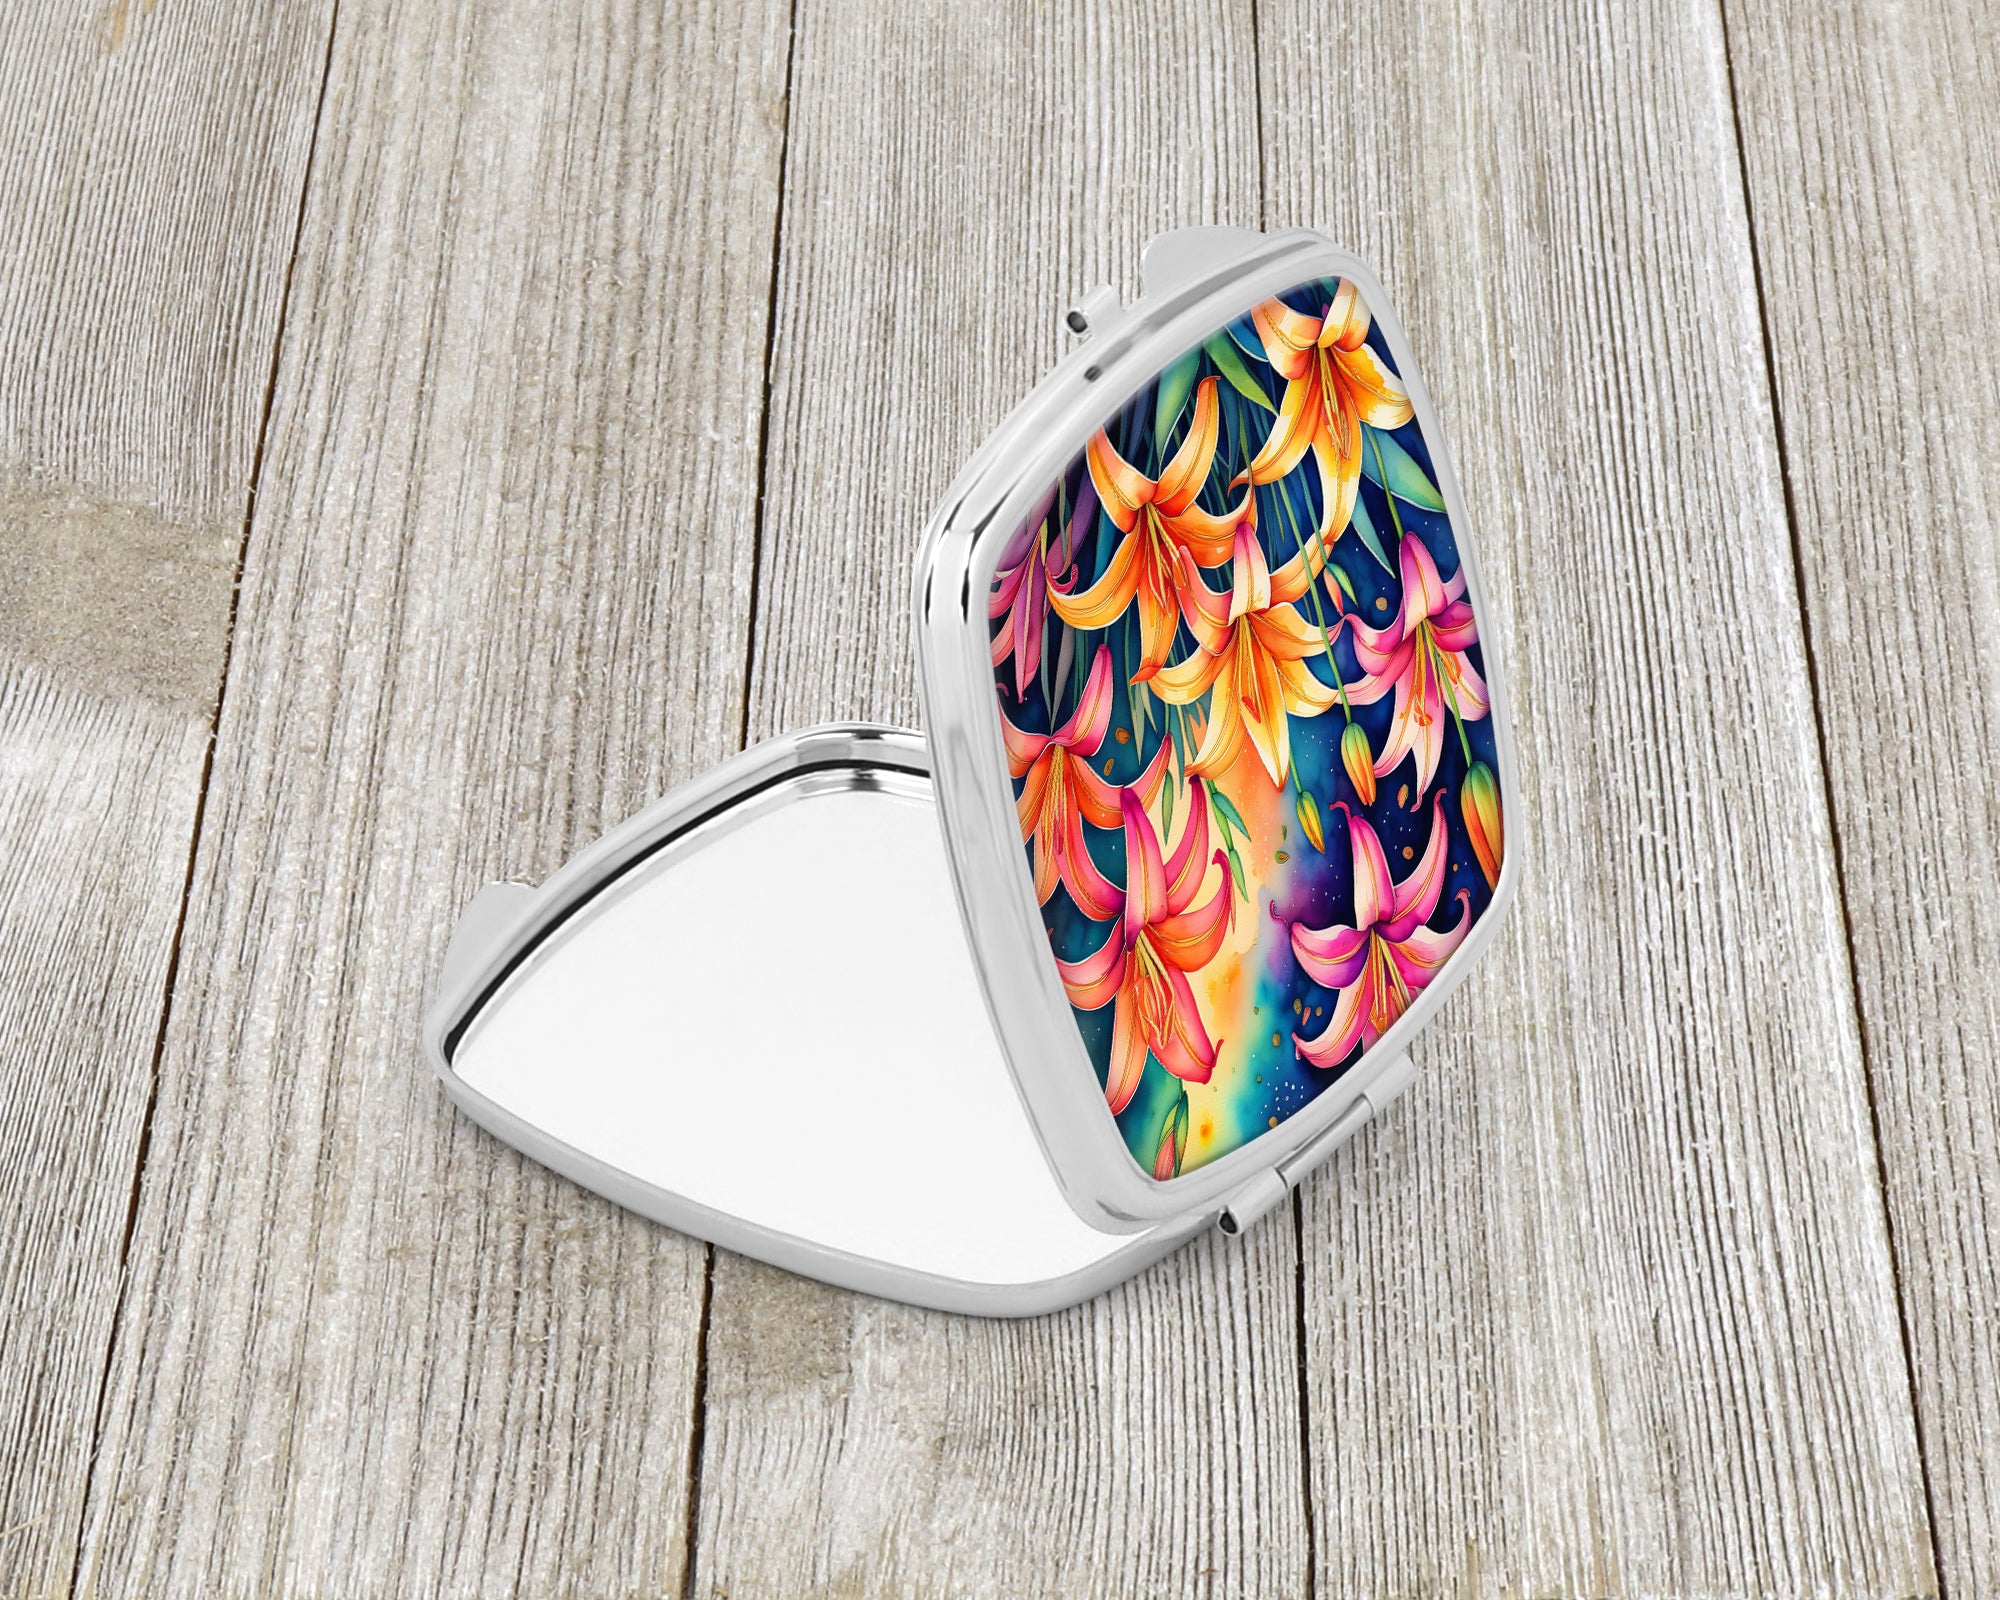 Buy this Colorful Lilies Compact Mirror